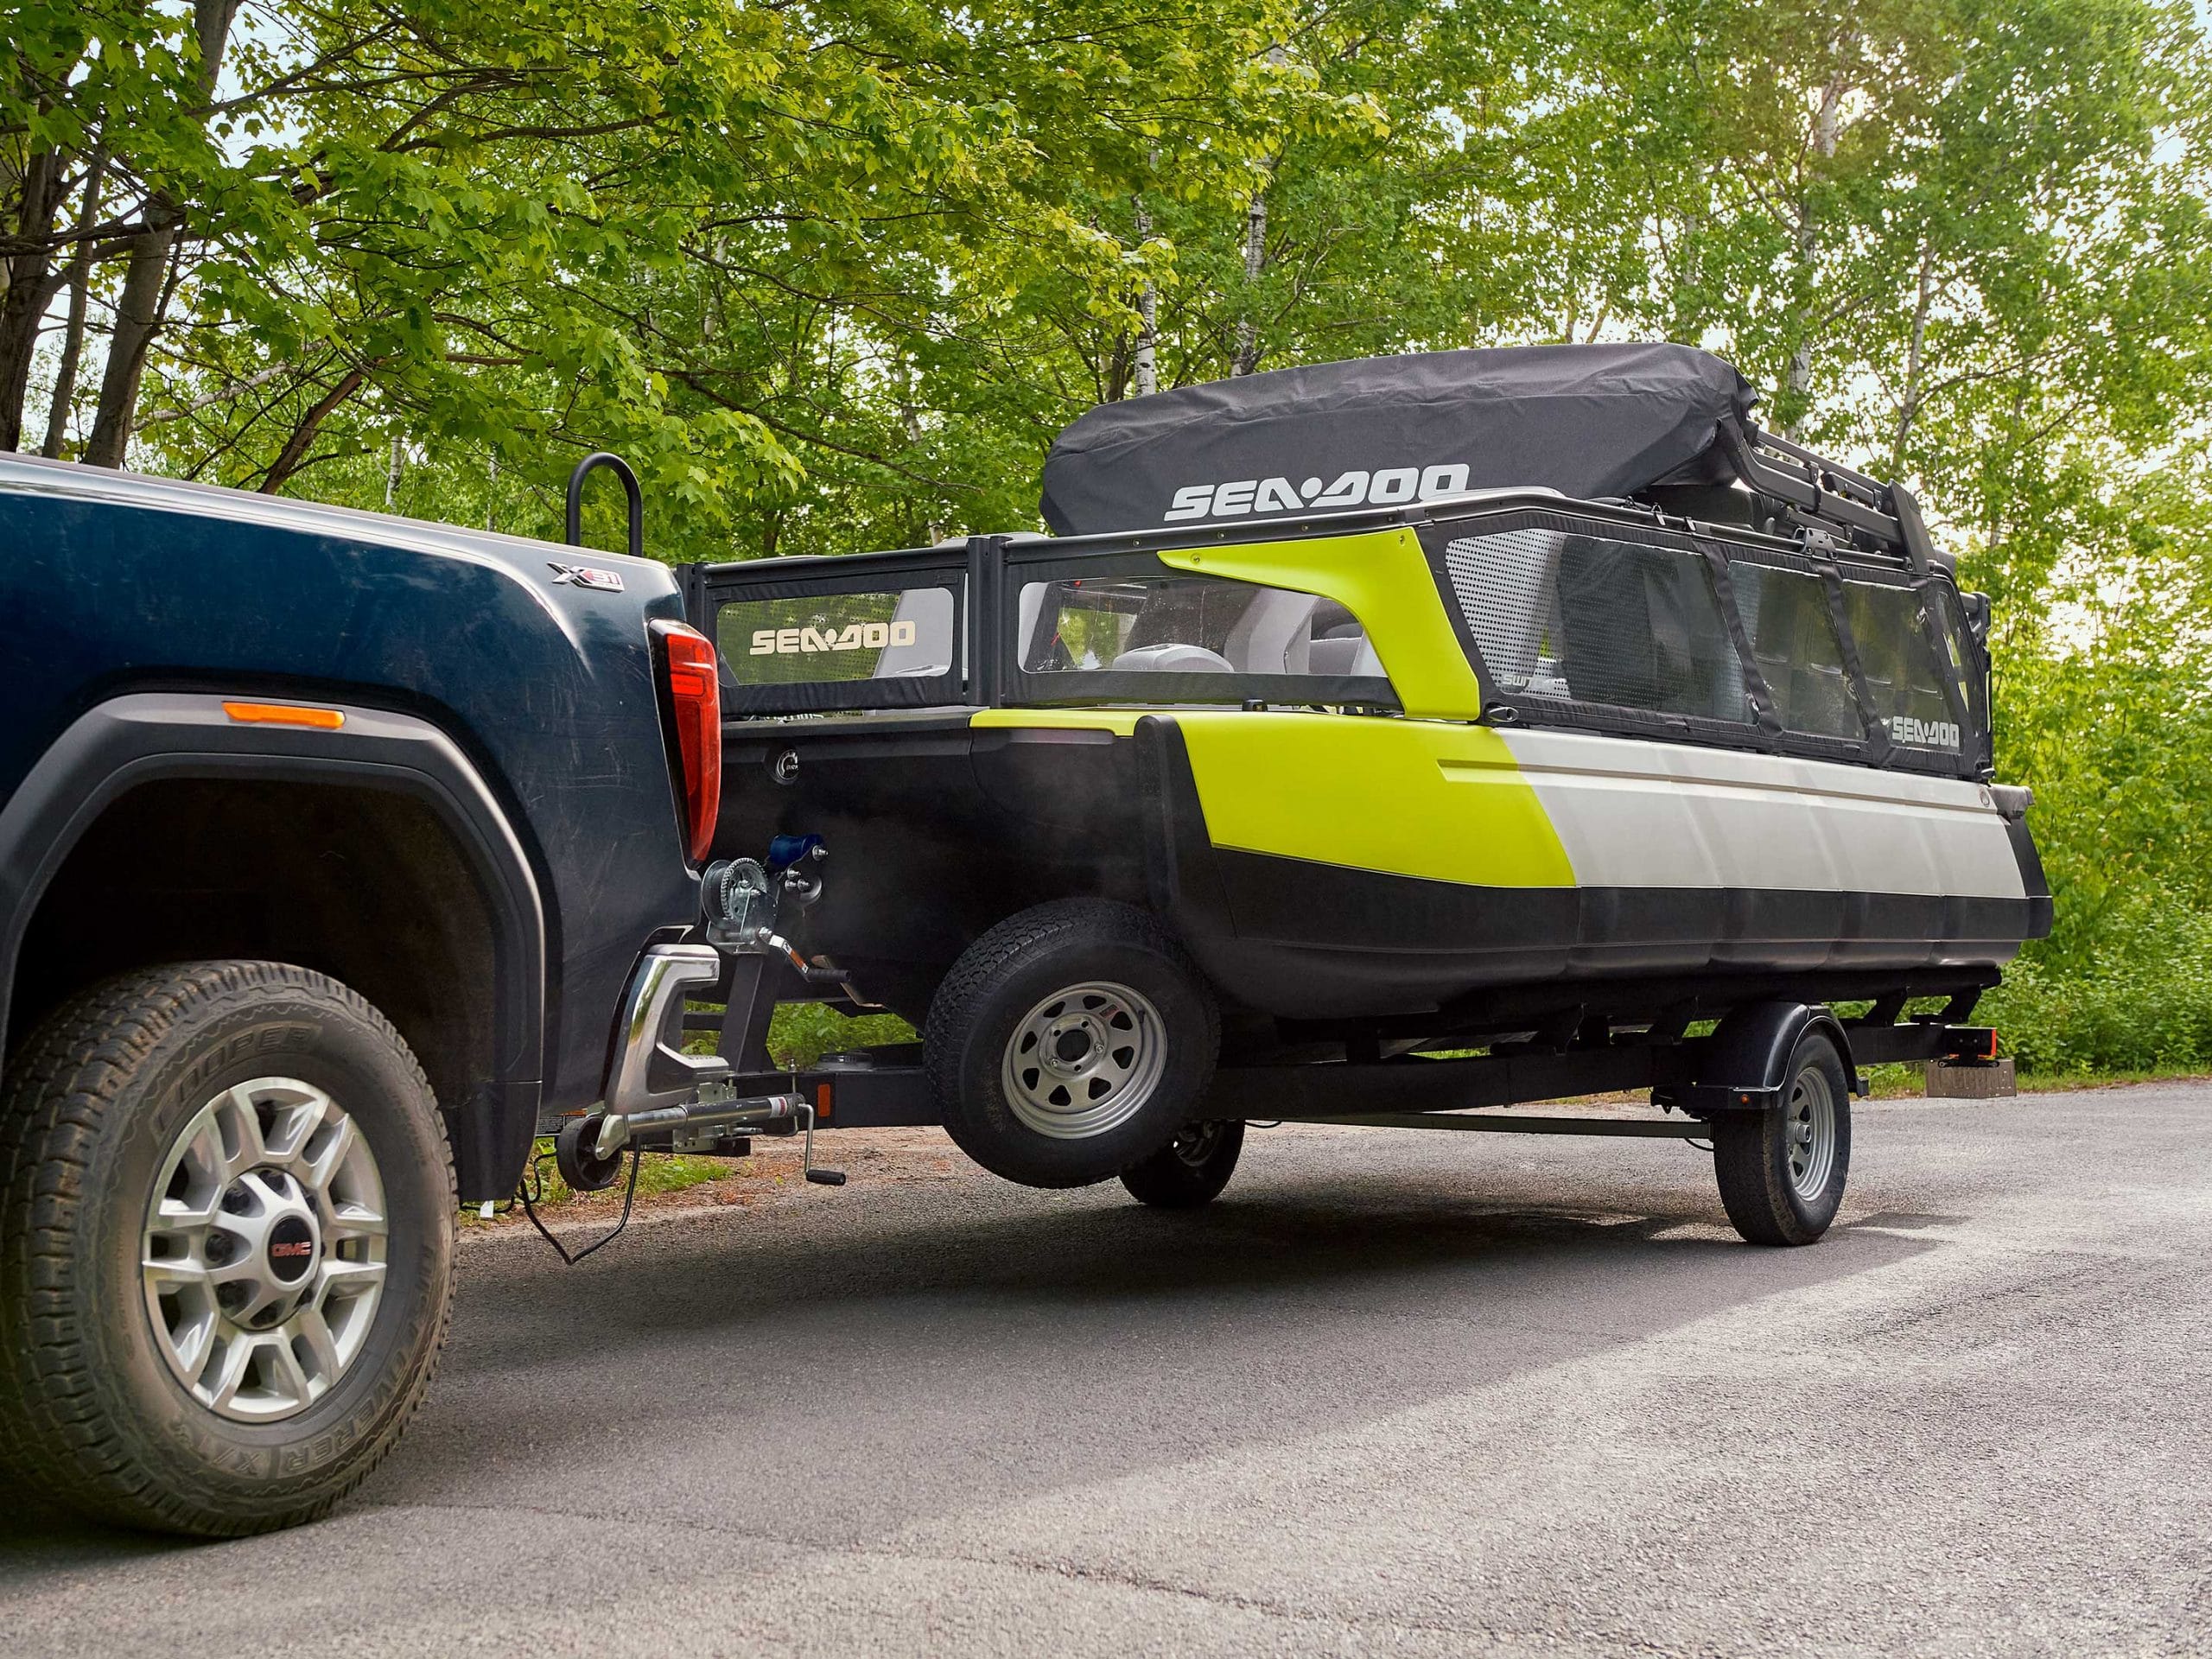 Trailer included with all Switch Pontoons. Source: https://www.sea-doo.com/ca/en/pontoons/switch.html